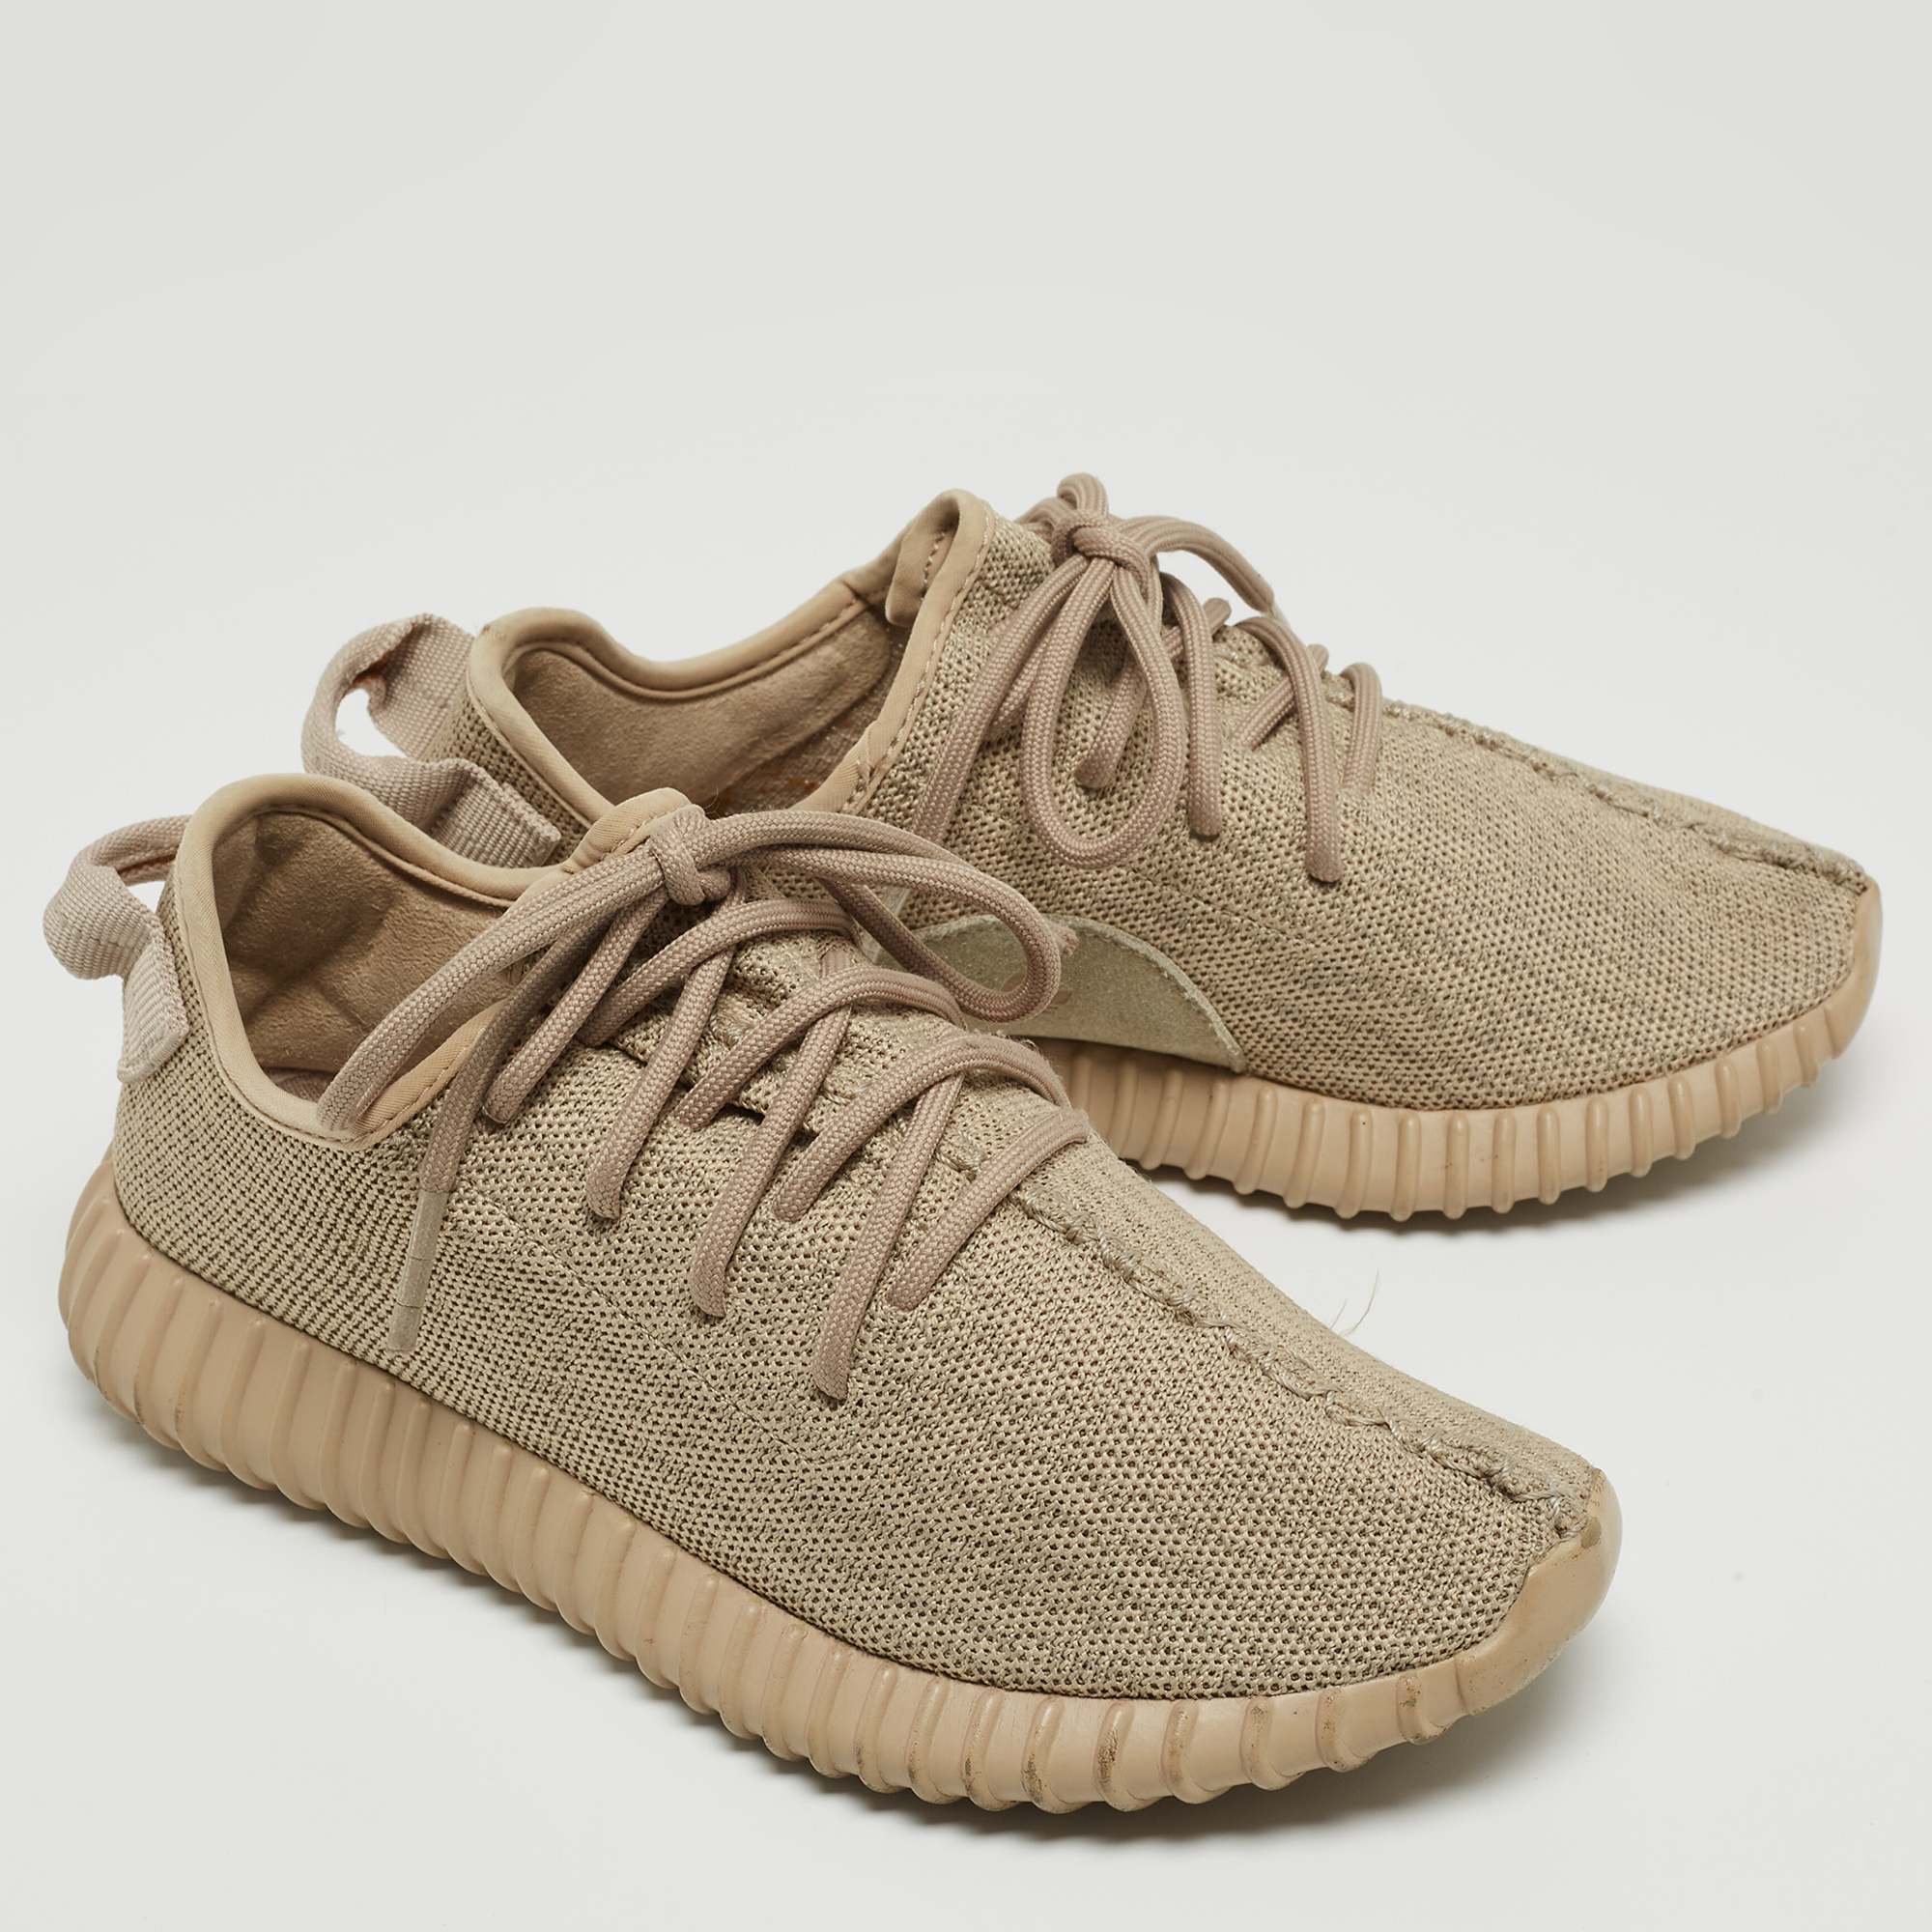 Yeezy x Adidas Brown Suede Boost 350 V2 Oxford Tan Sneakers Size 42